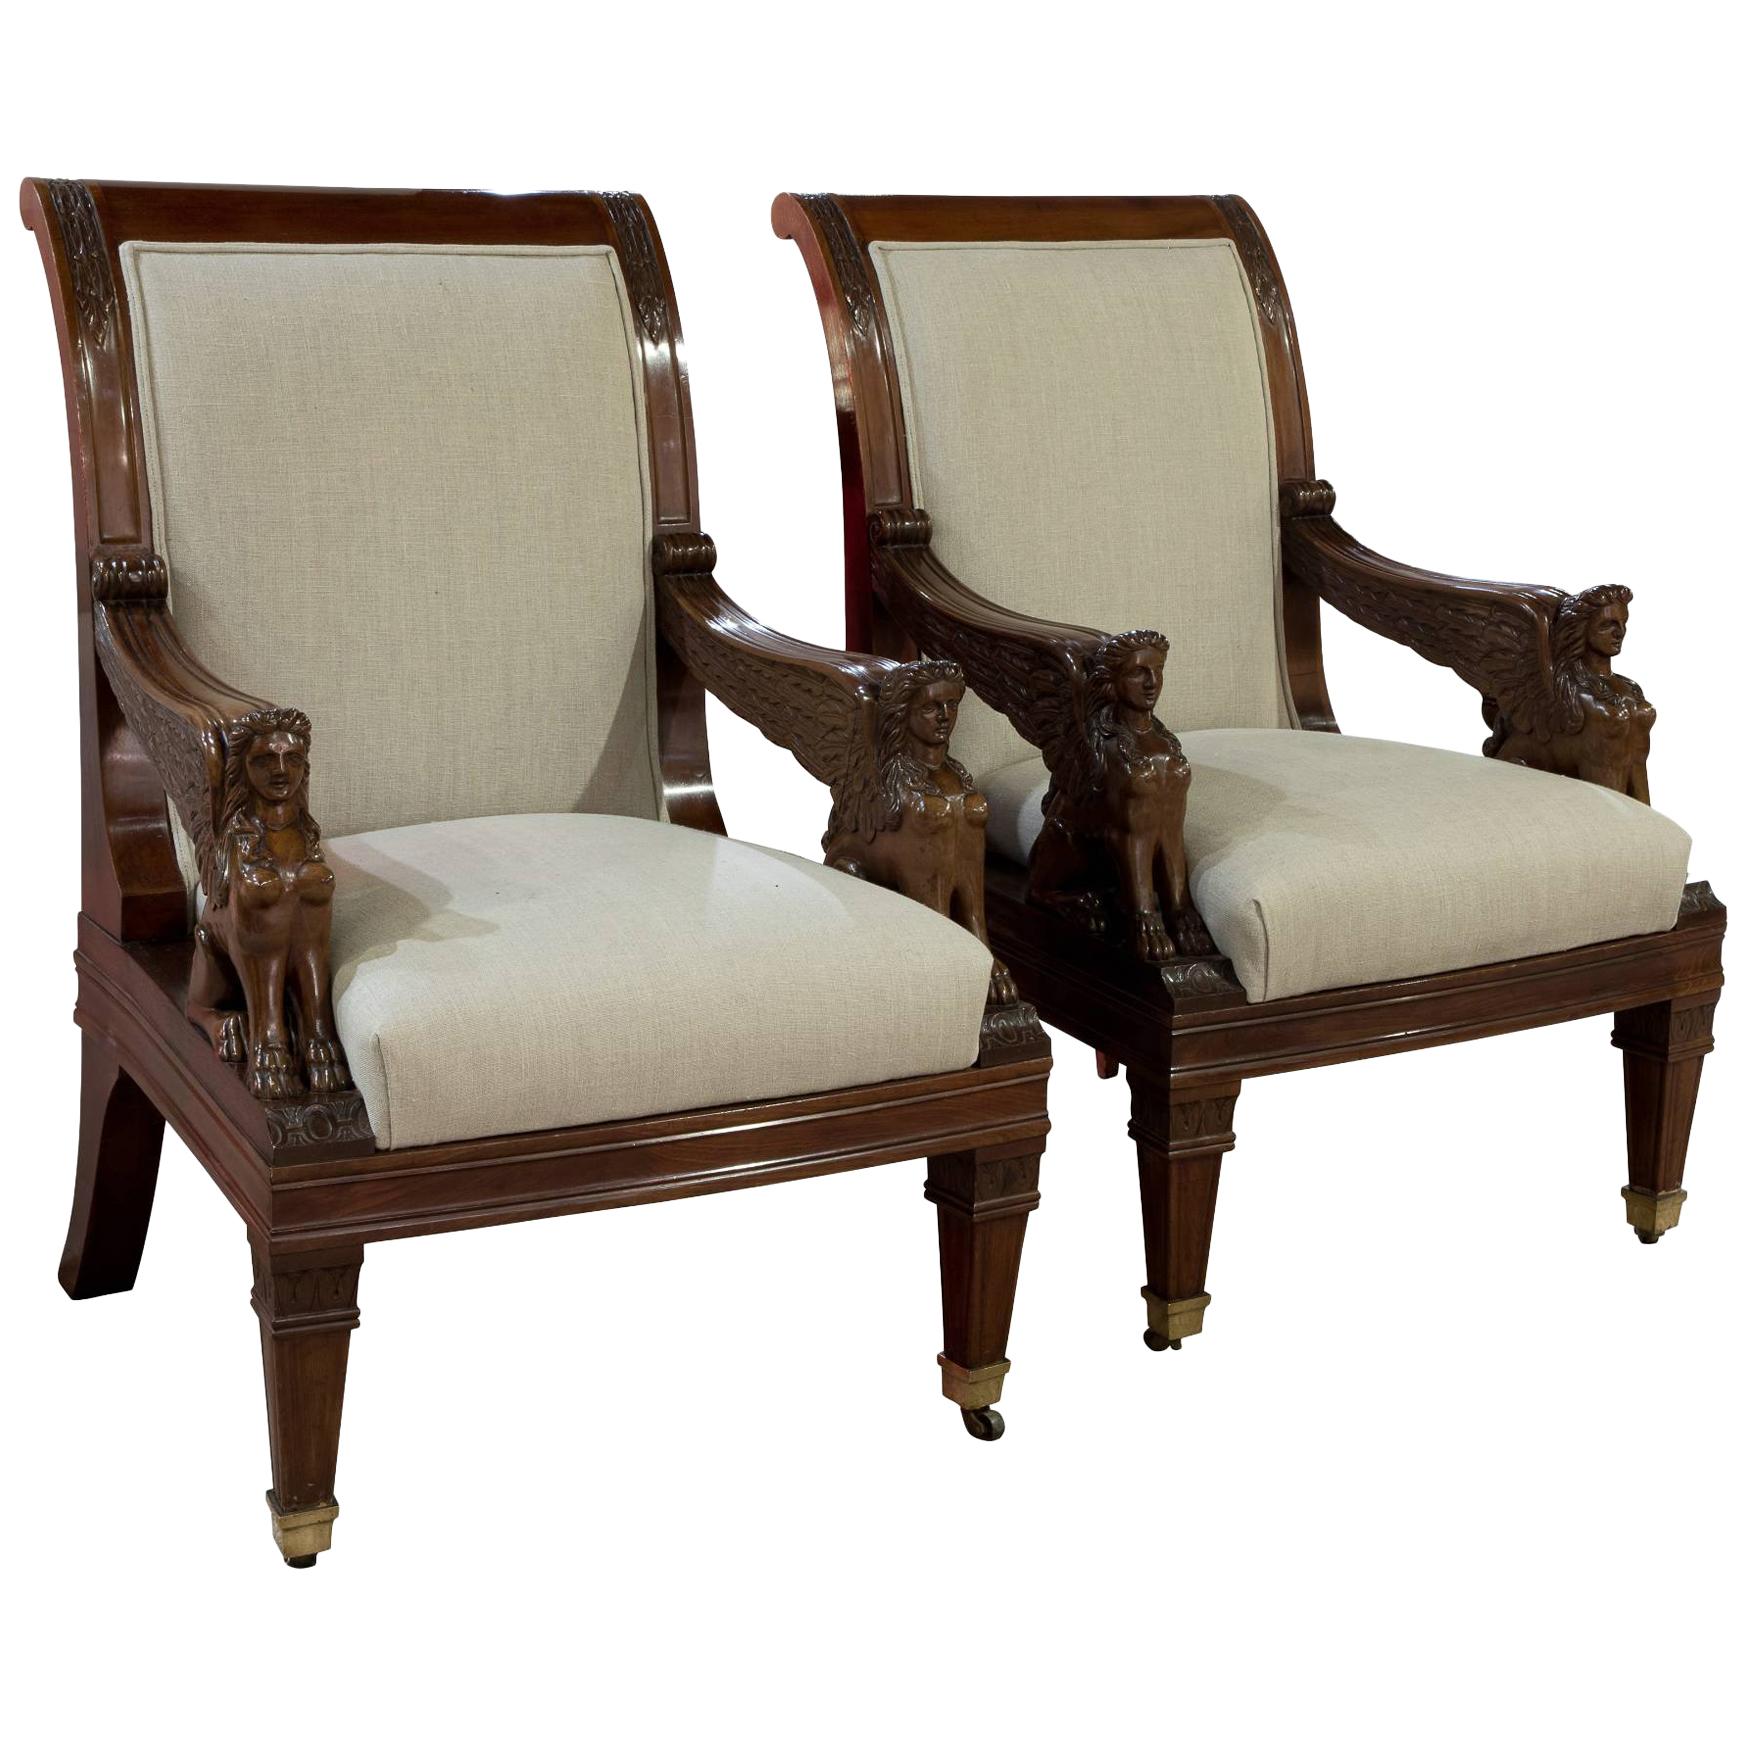 Pair of Mahogany Library Chairs with Carved Sphinx Decoration to the Arms 19thc For Sale